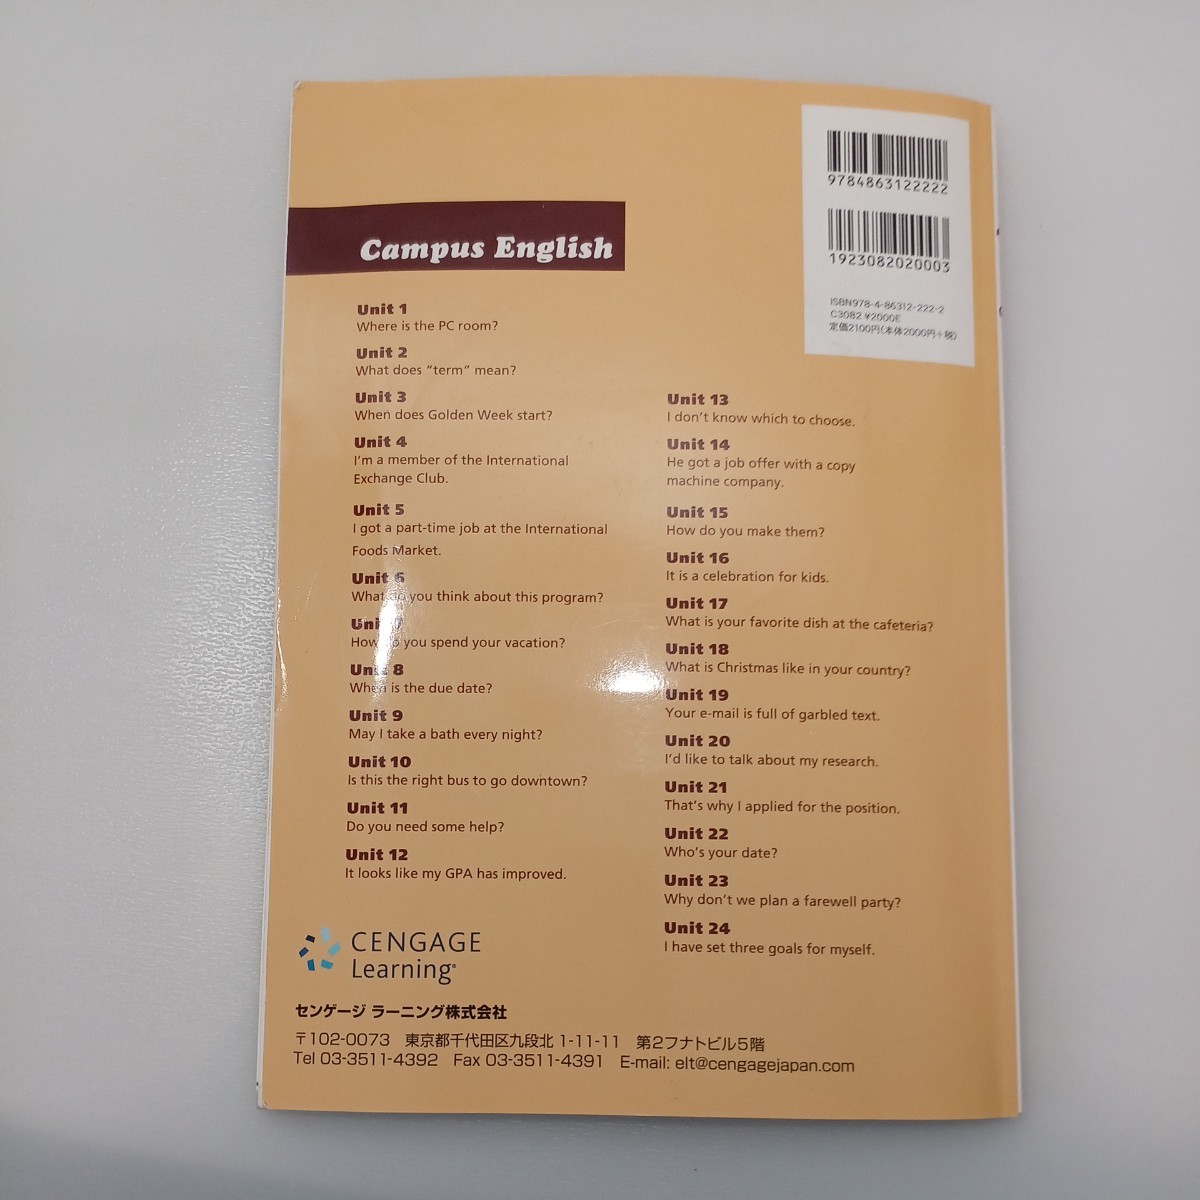 zaa-536♪Campus English Student Book (112 pp) with Audio CD Cengage Learning CD-ROM付